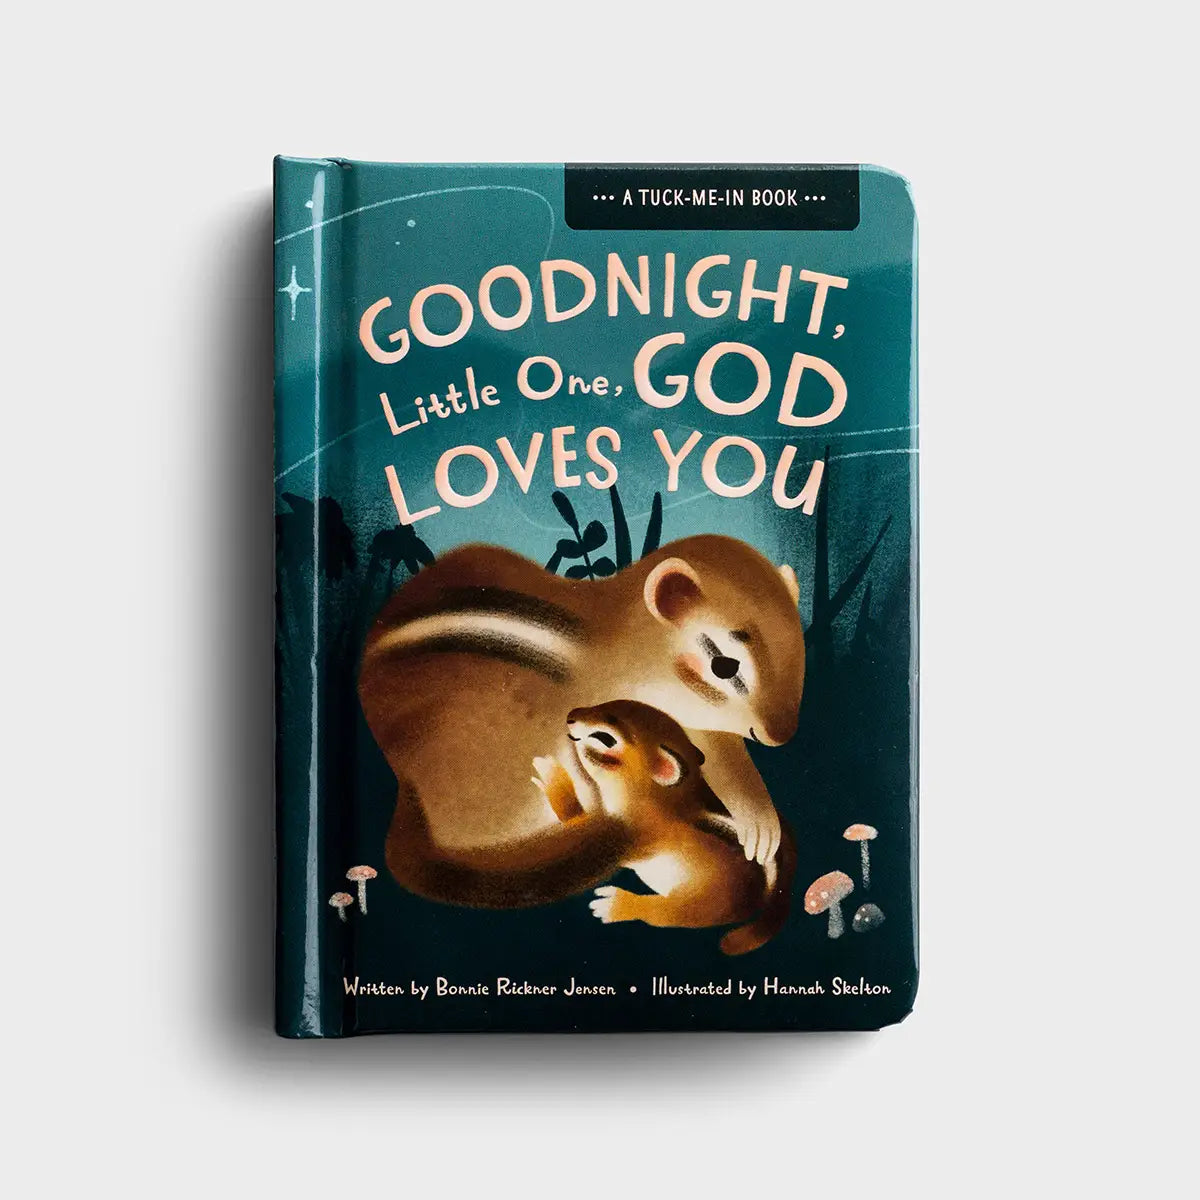 Daysprings Goodnight Little One, God Loves You - A Tuck-Me-In Book